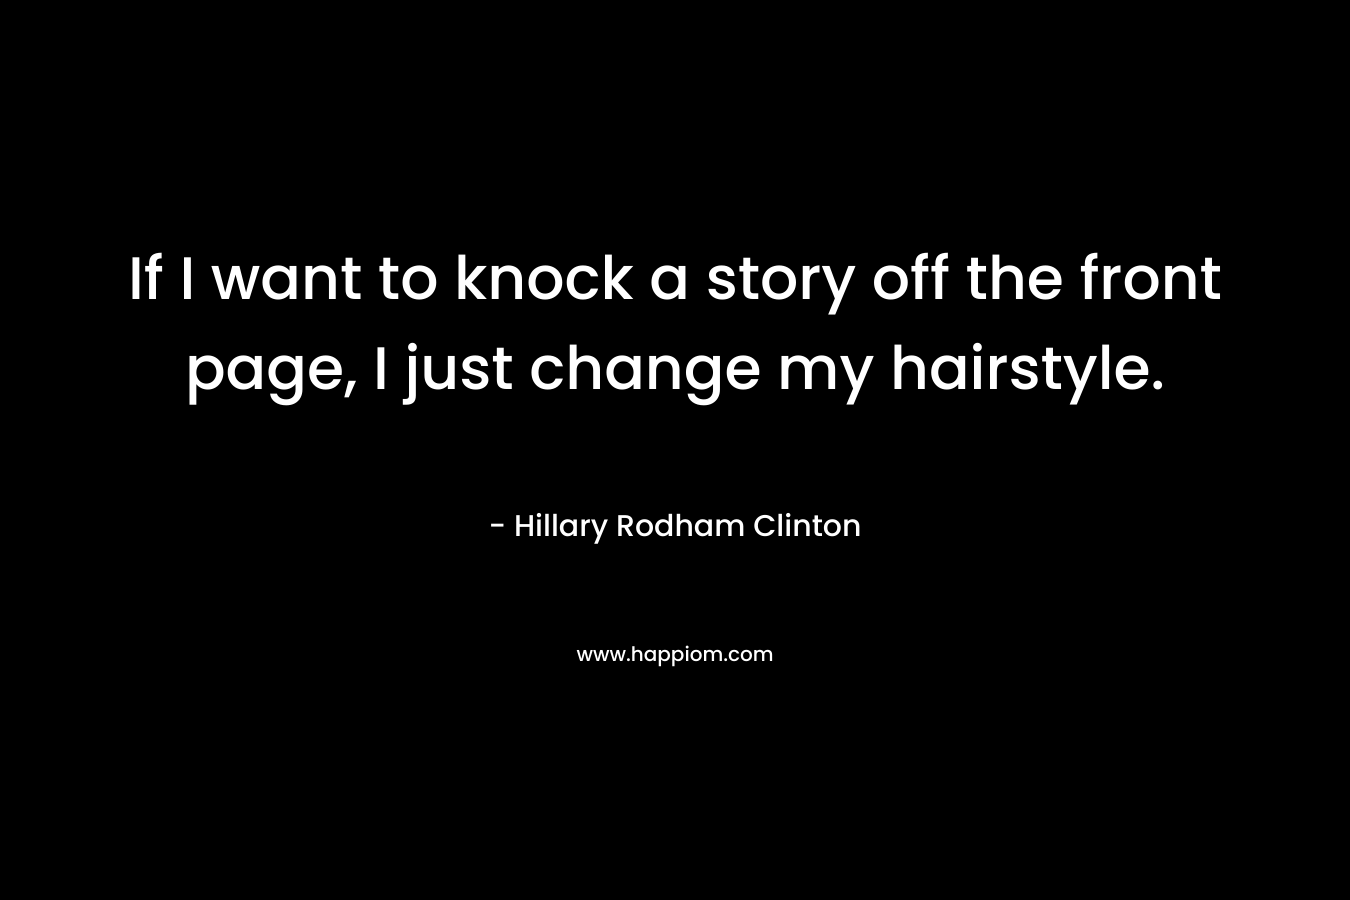 If I want to knock a story off the front page, I just change my hairstyle. – Hillary Rodham Clinton